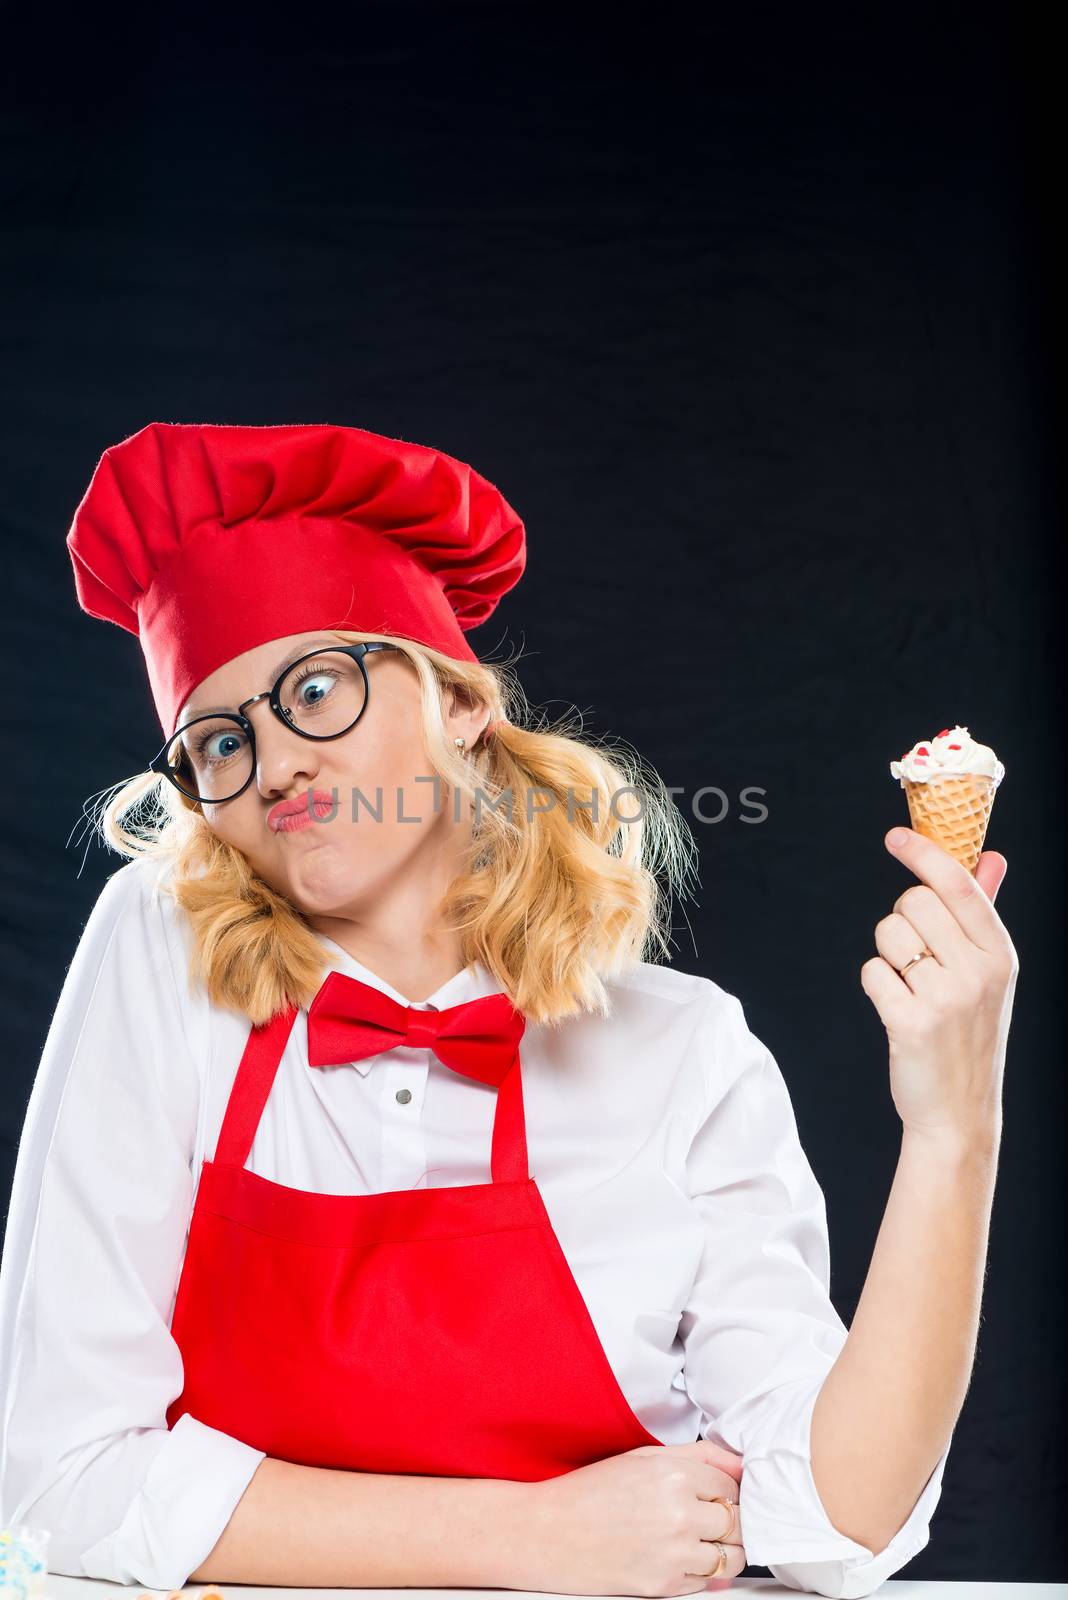 Woman with ice cream homemade grimaces on black background by kosmsos111